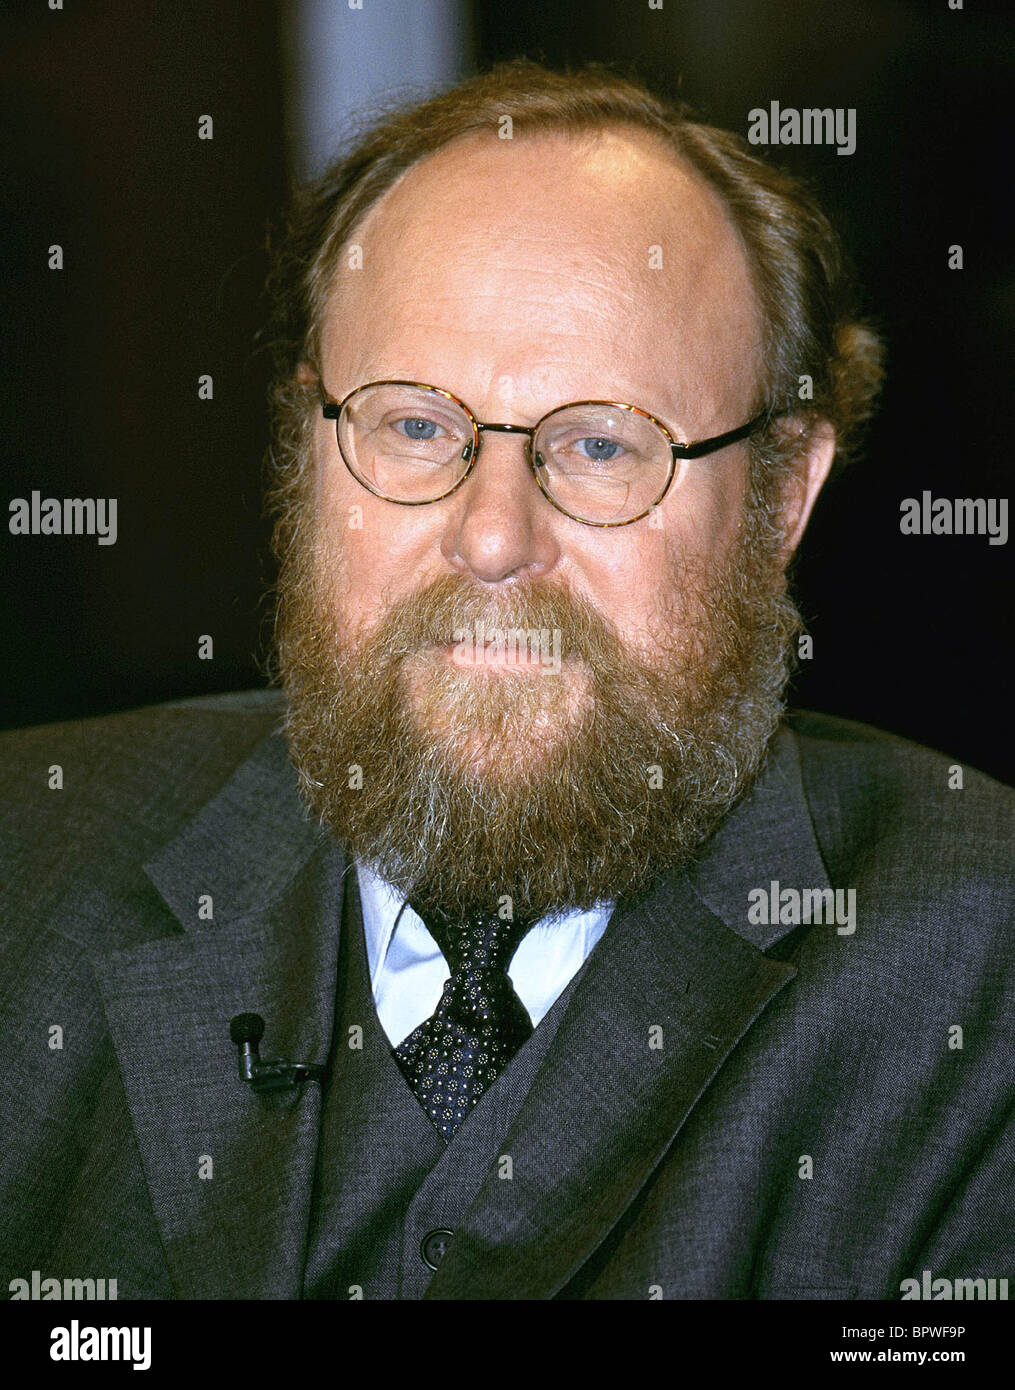 WOLGANG THIERSE PRESIDENT OF THE BUNDESTAG 20 March 1987 CANNON Stock Photo